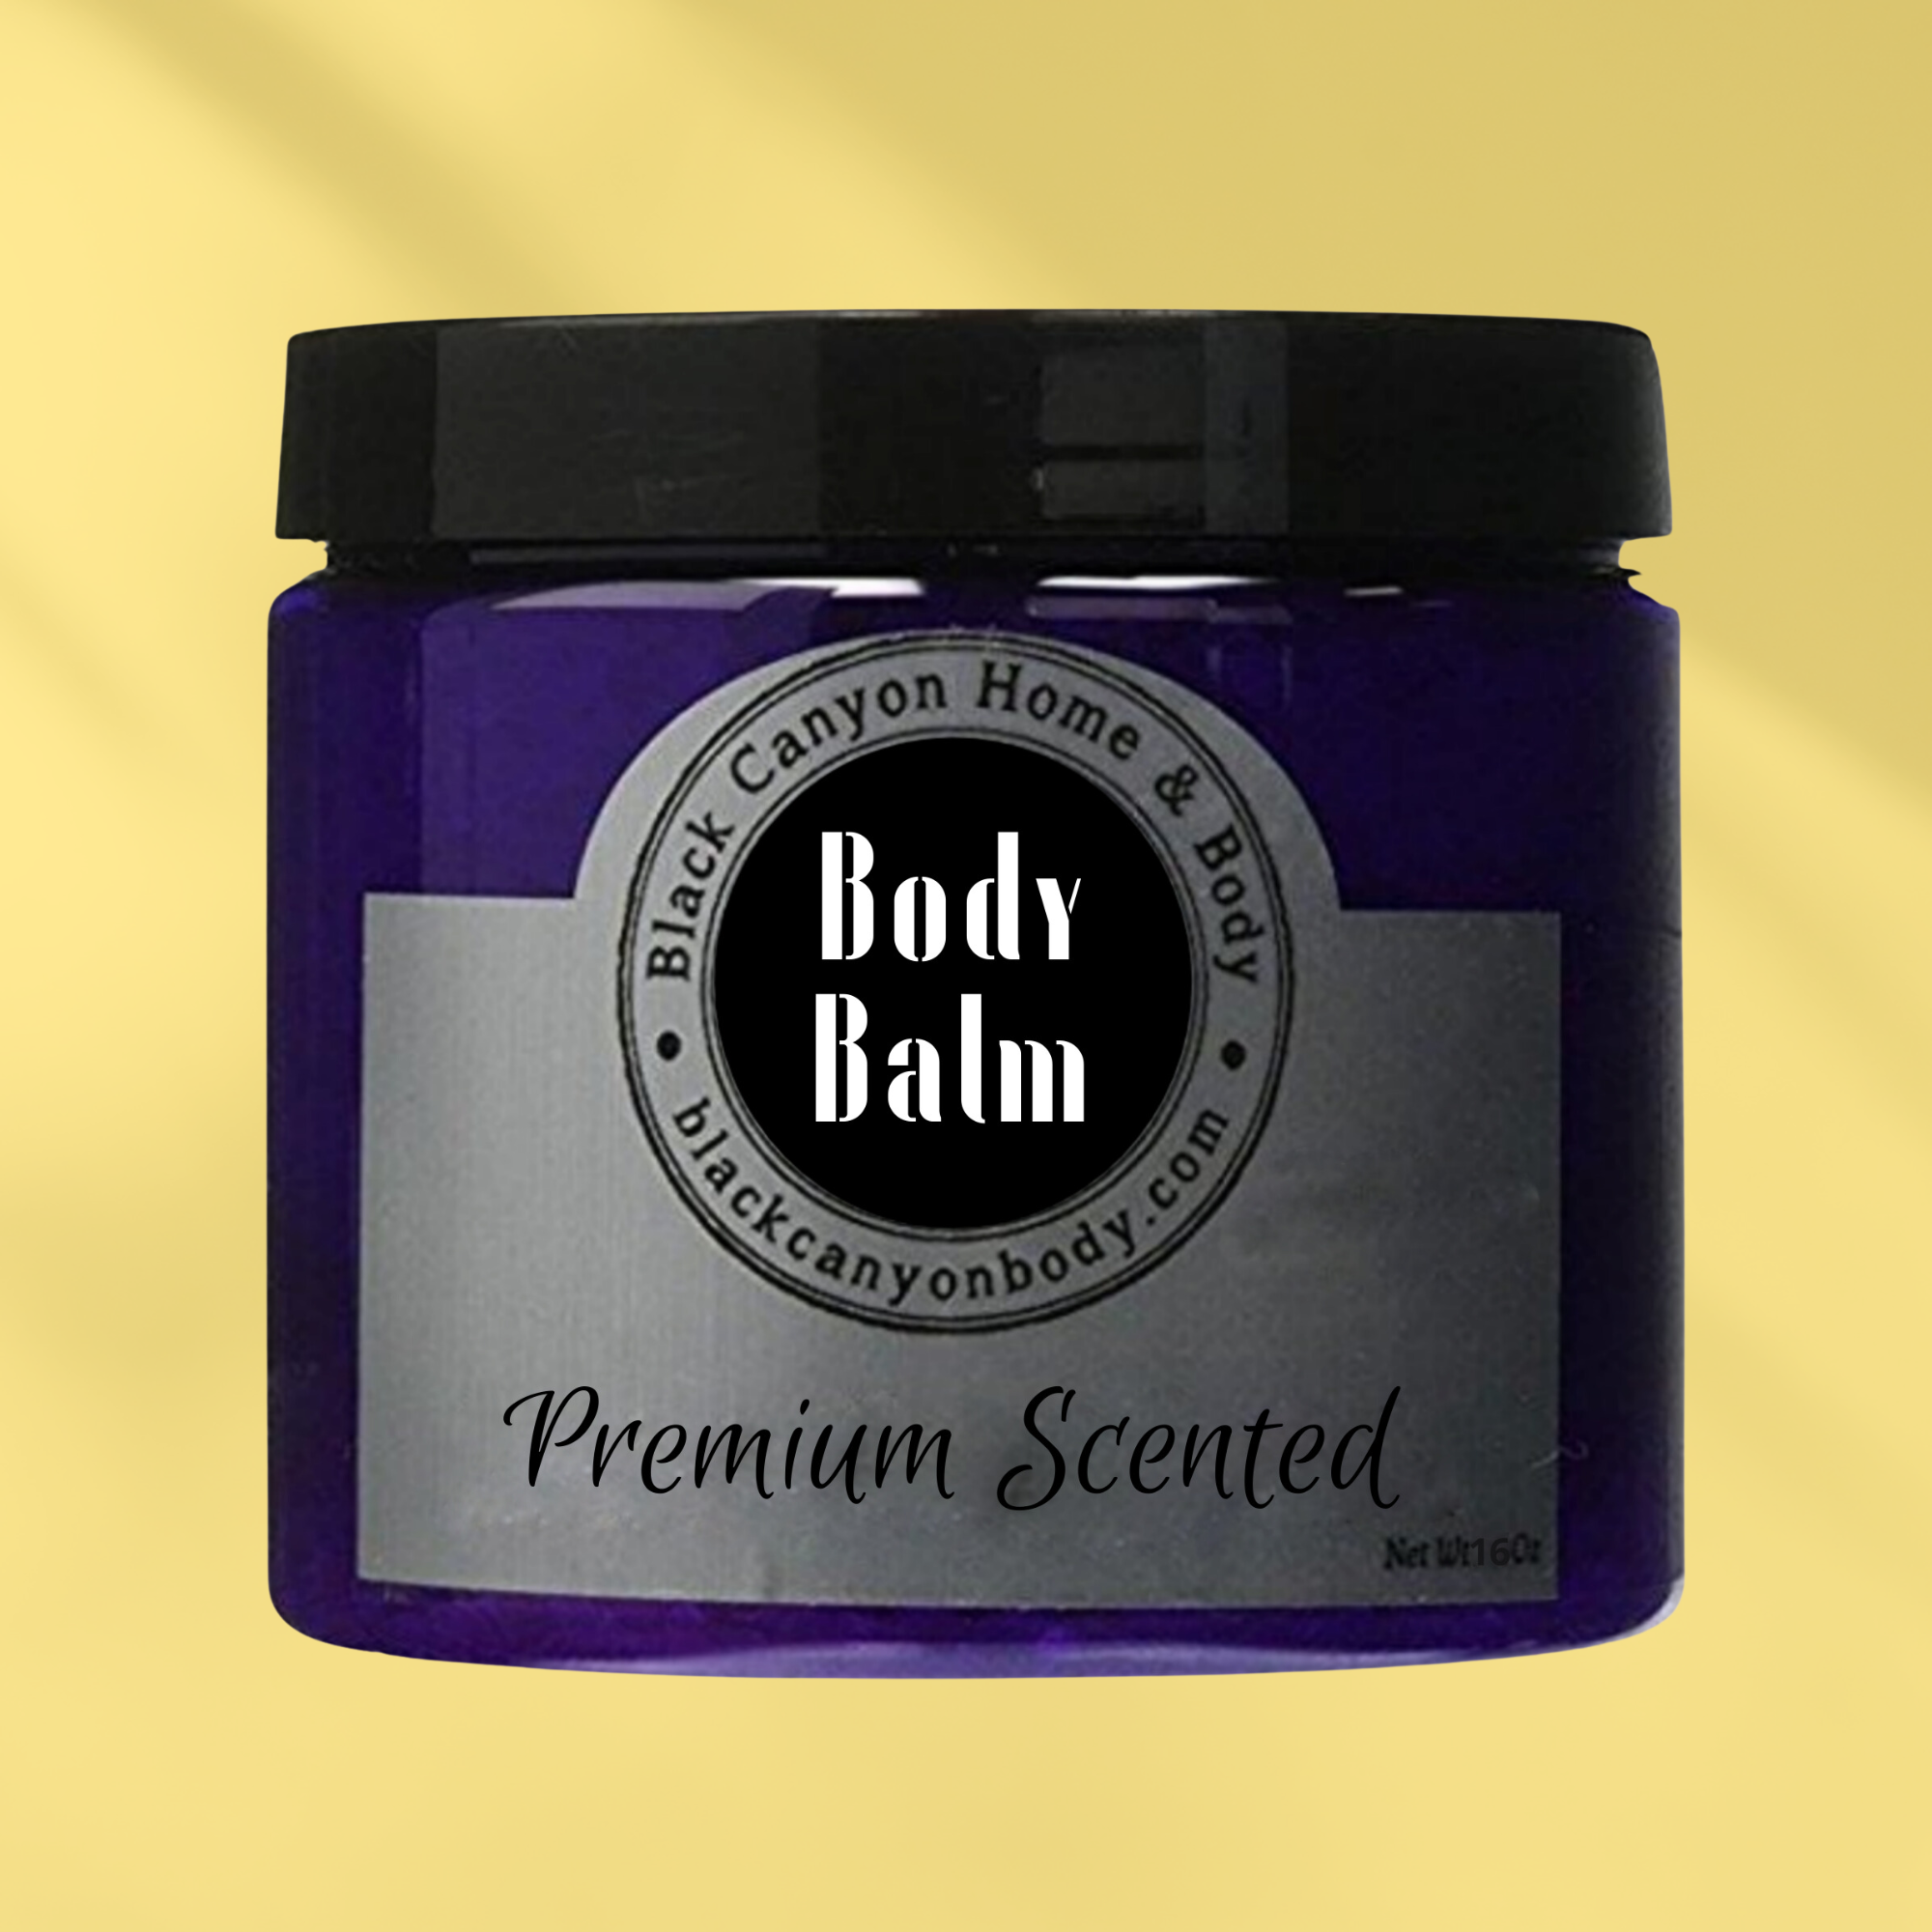 Black Canyon Cherry Blossom Blast Scented Natural Body Balm with Shea